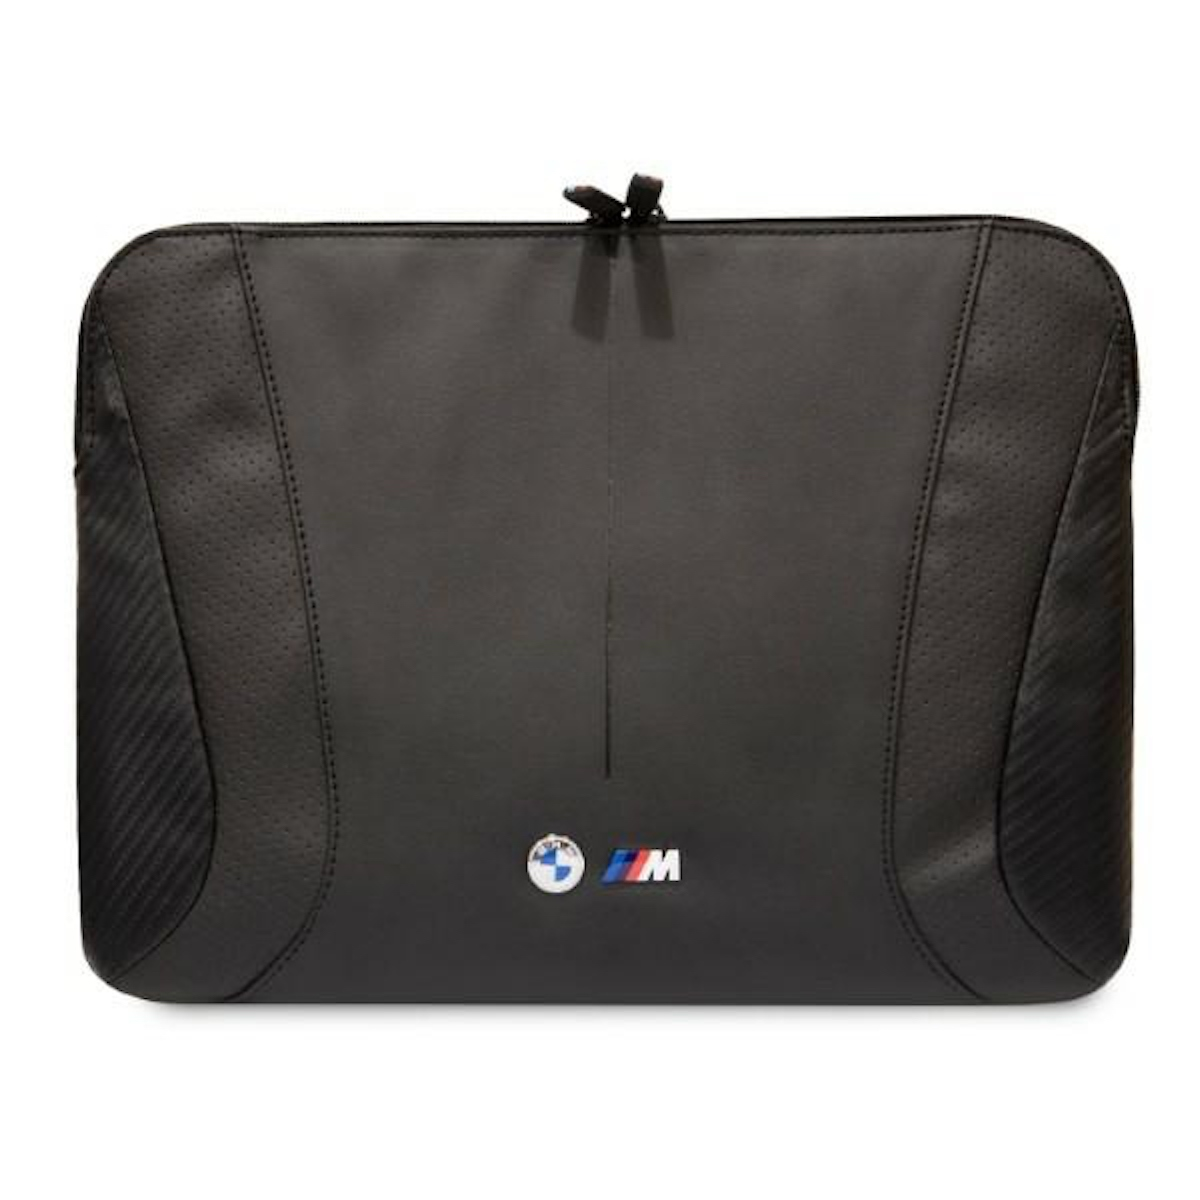 Carbon bis bis Tablet BMW Notebook Schwarz Universell Full Cover, Hülle Universell Tasche 16\